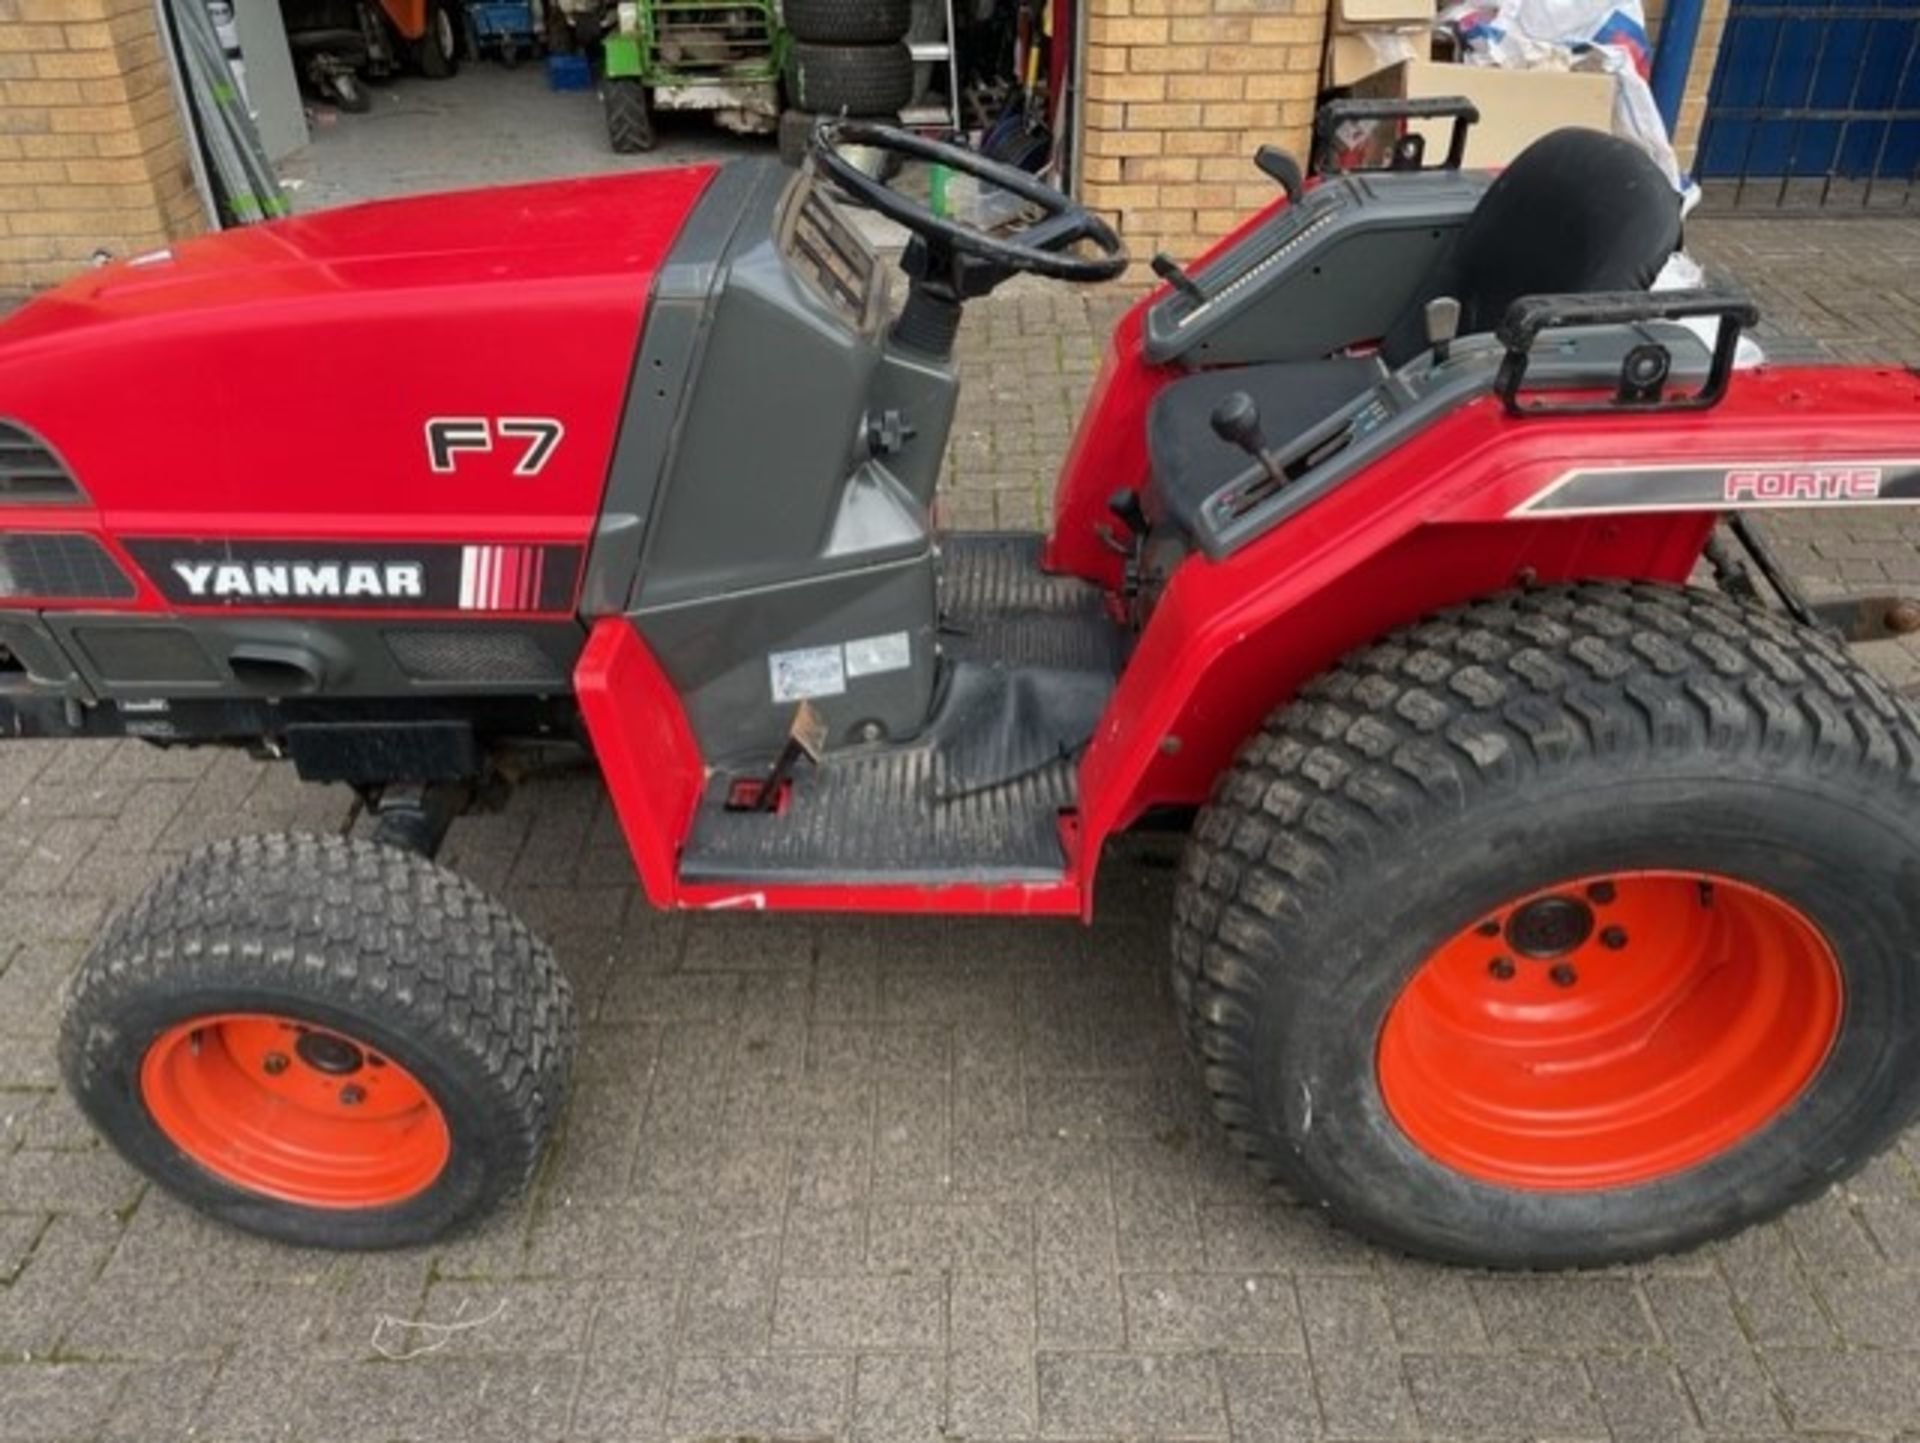 yanmar 22 horse tractor 1200 hours in full working order video can be sent to serious bidders